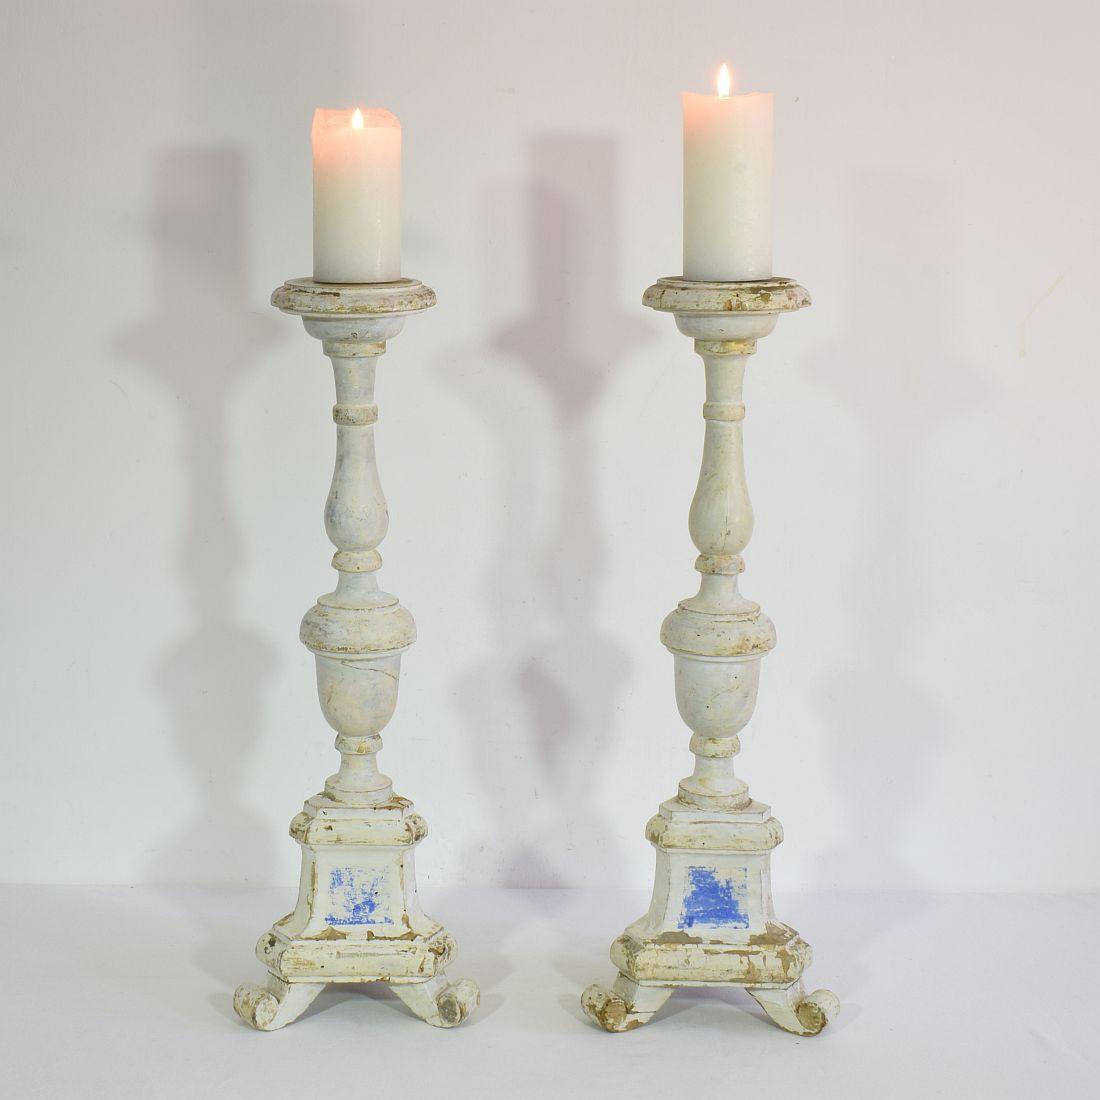 Great pair of carved wooden candleholders in neoclassical style with traces of old color
Italy, circa 1850
Weathered, small losses and old repairs.
Measurements are individual.